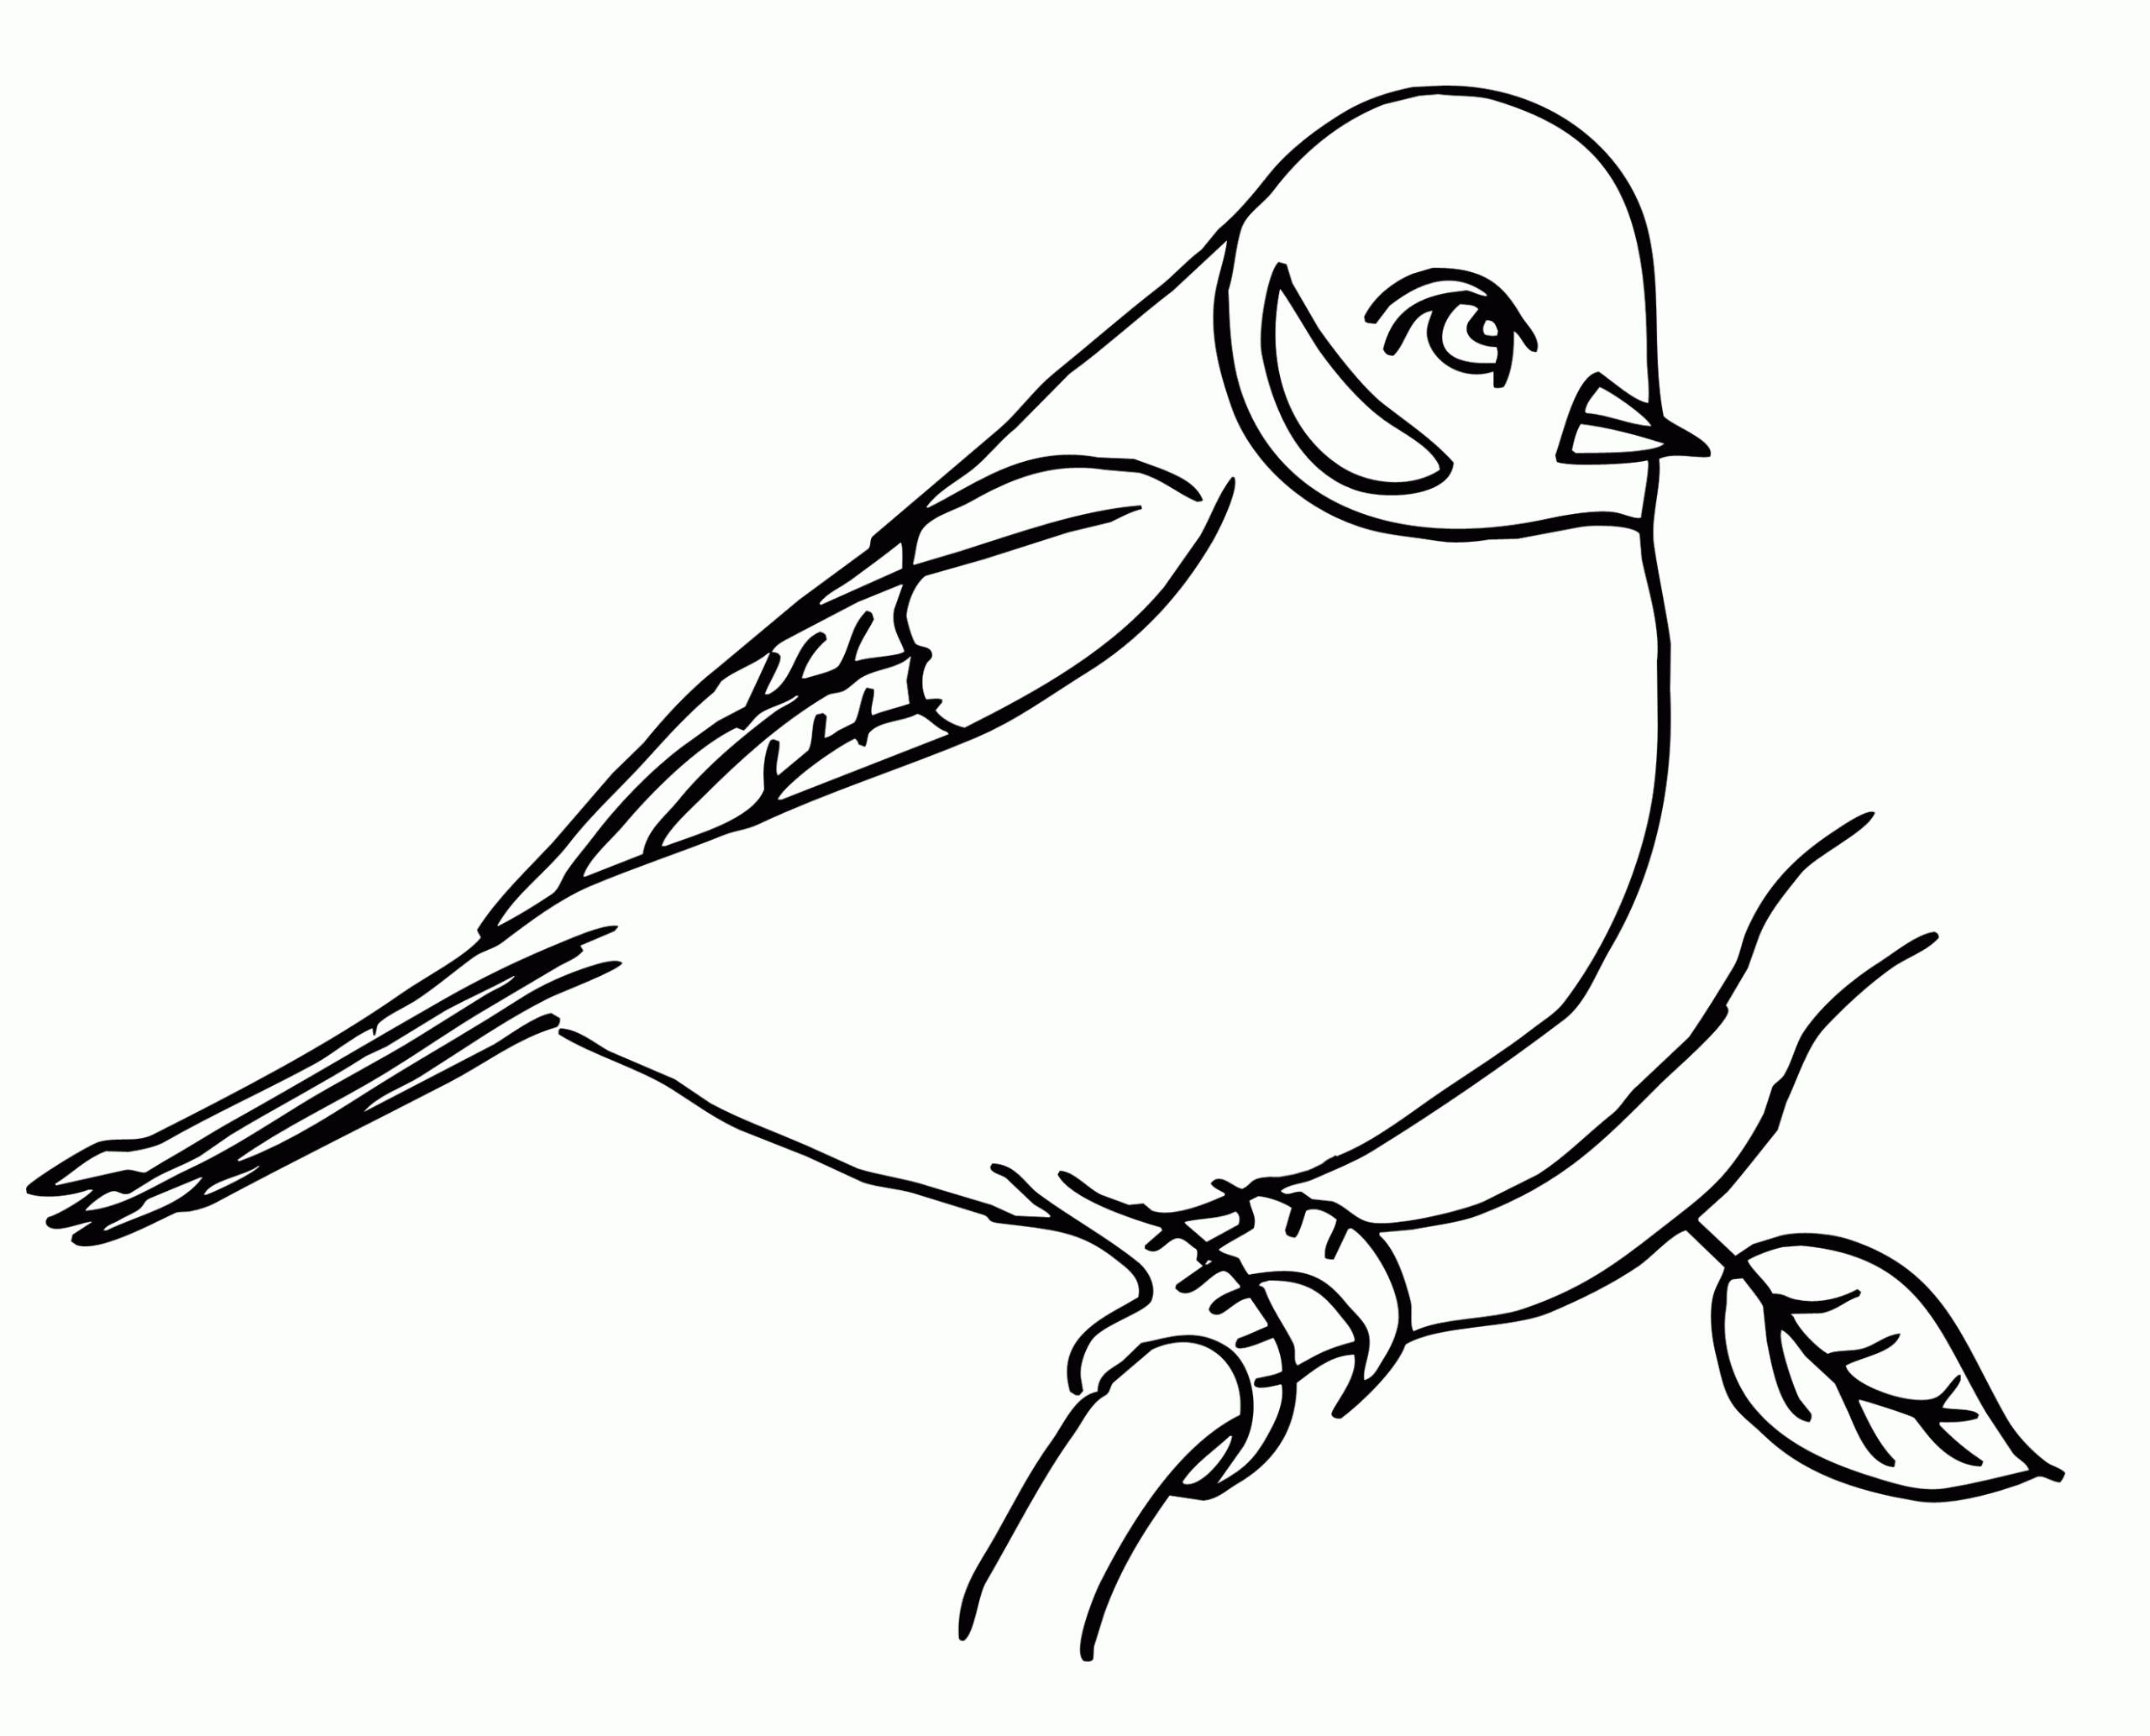 Bird on a branch coloring page print